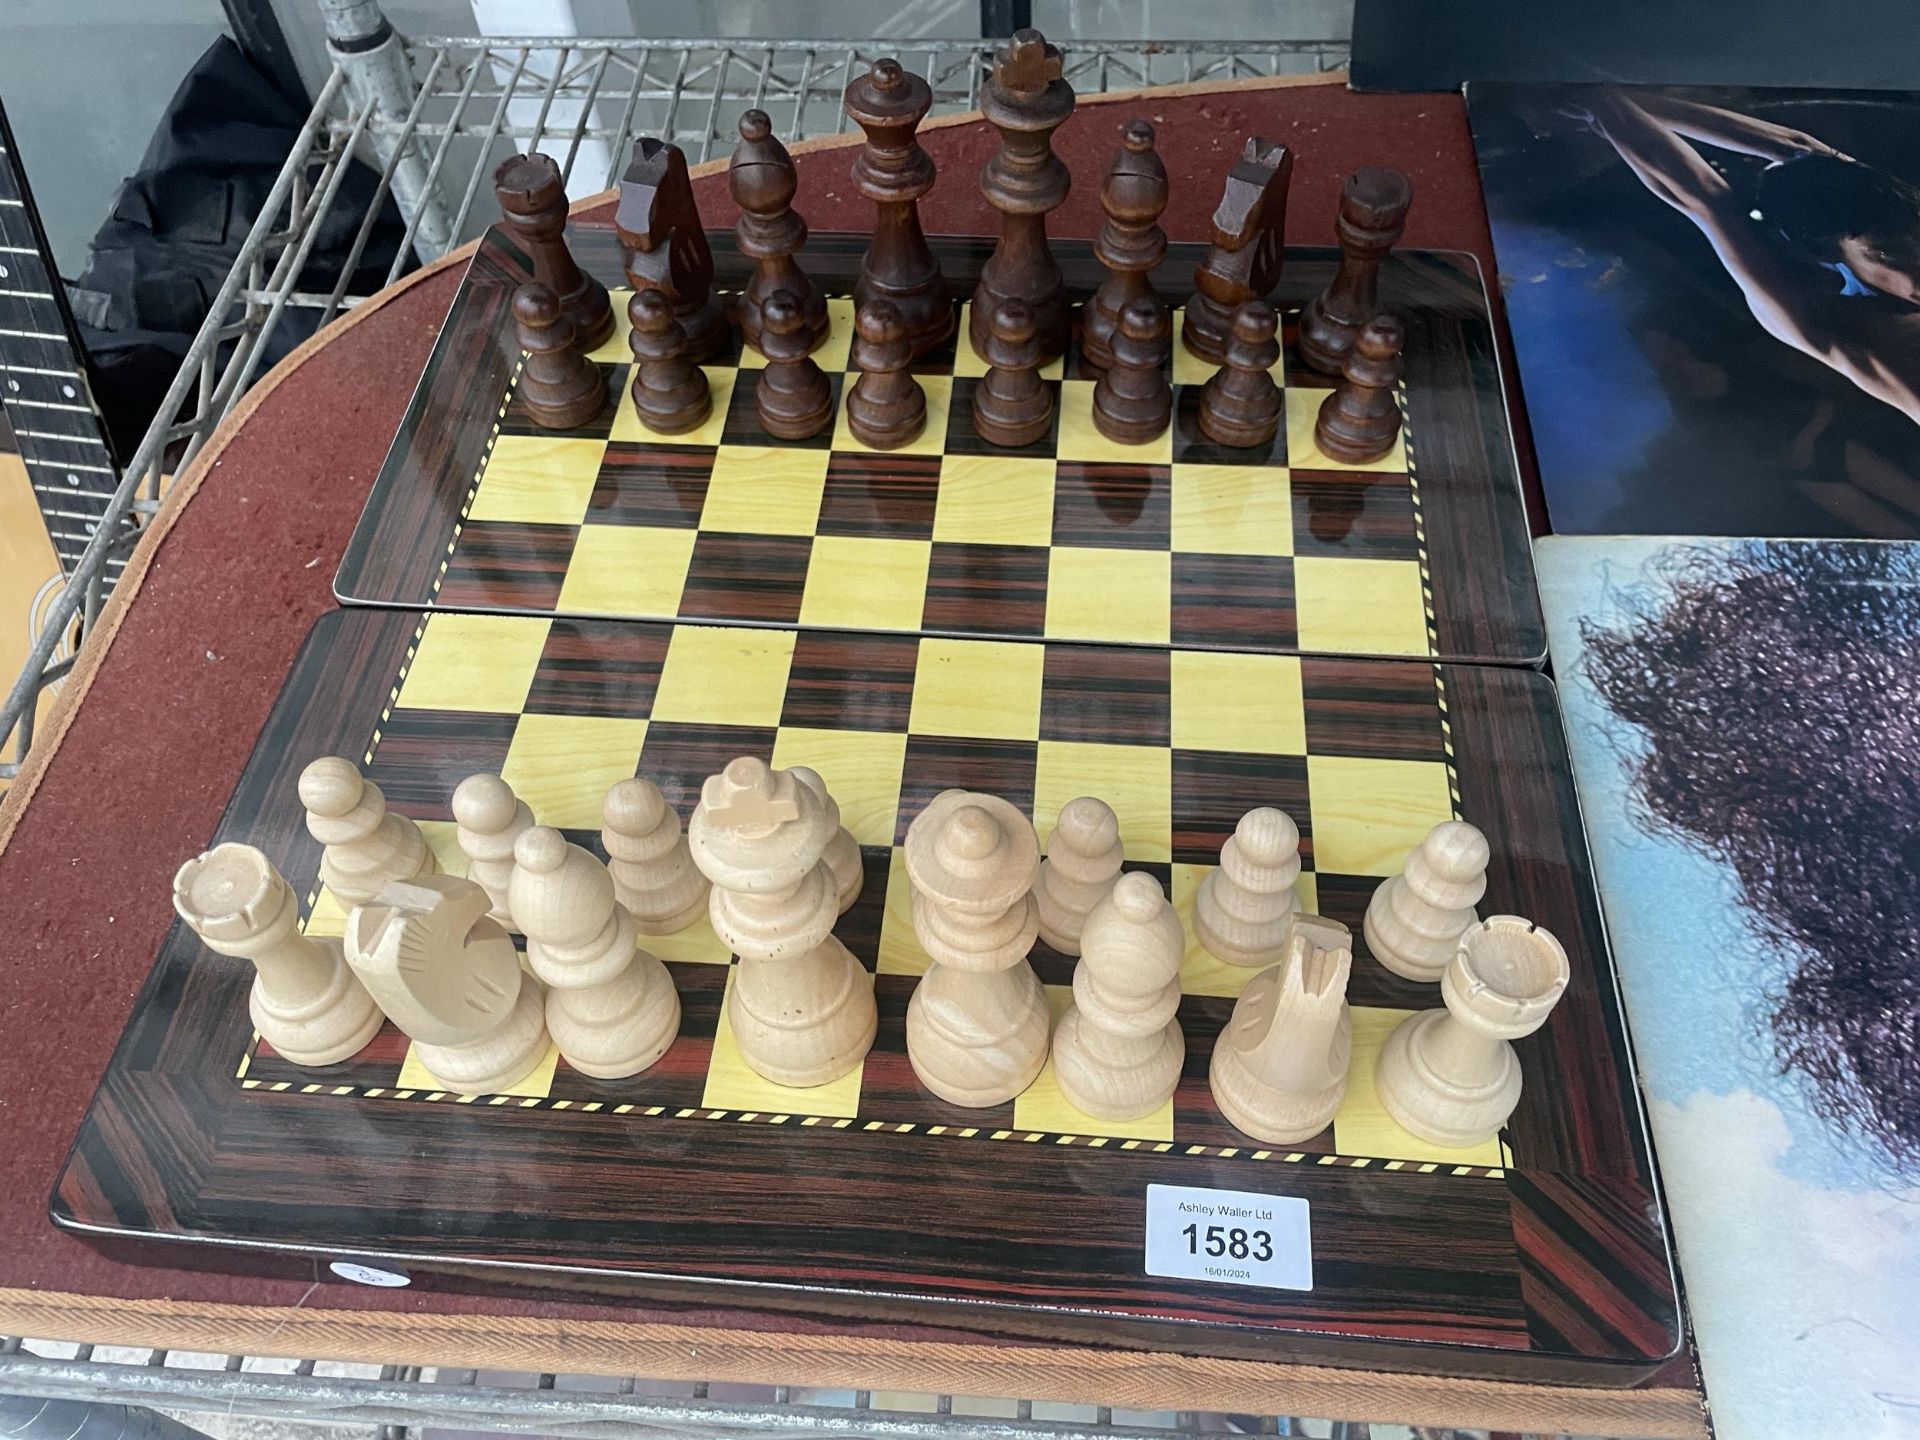 A FOLDING CHESS BOARD WITH A FULL SET OF CHESS PIECES